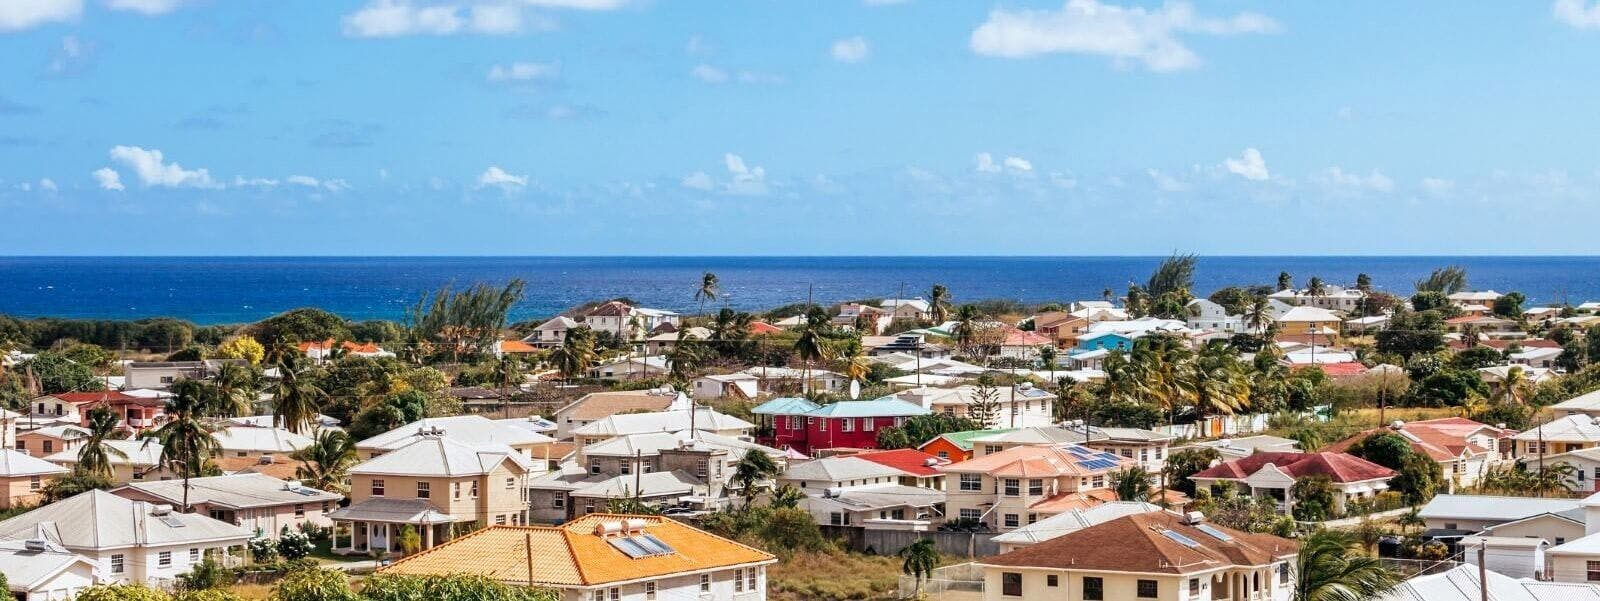 Christ Church town in Barbados